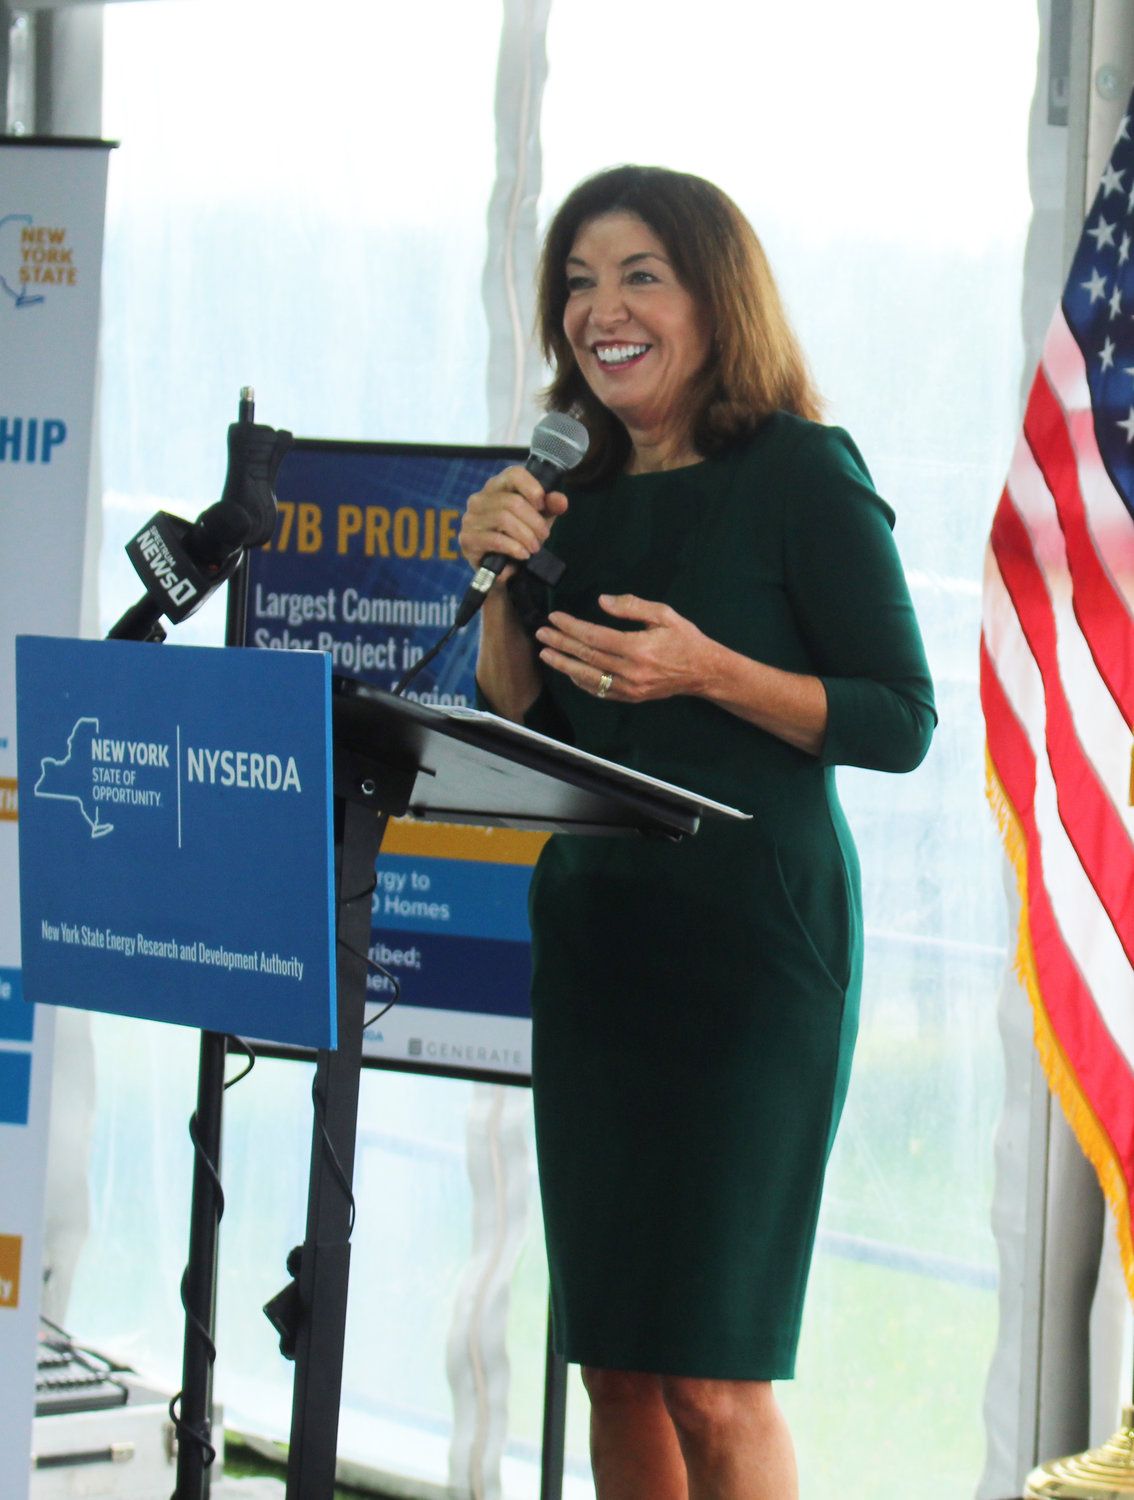 Lieutenant Governor Kathy Hochul said that thanks to solar projects like the one pictured behind her, New York State is halfway to its stated goal of producing 6 Gigawatts of solar energy by 2025.